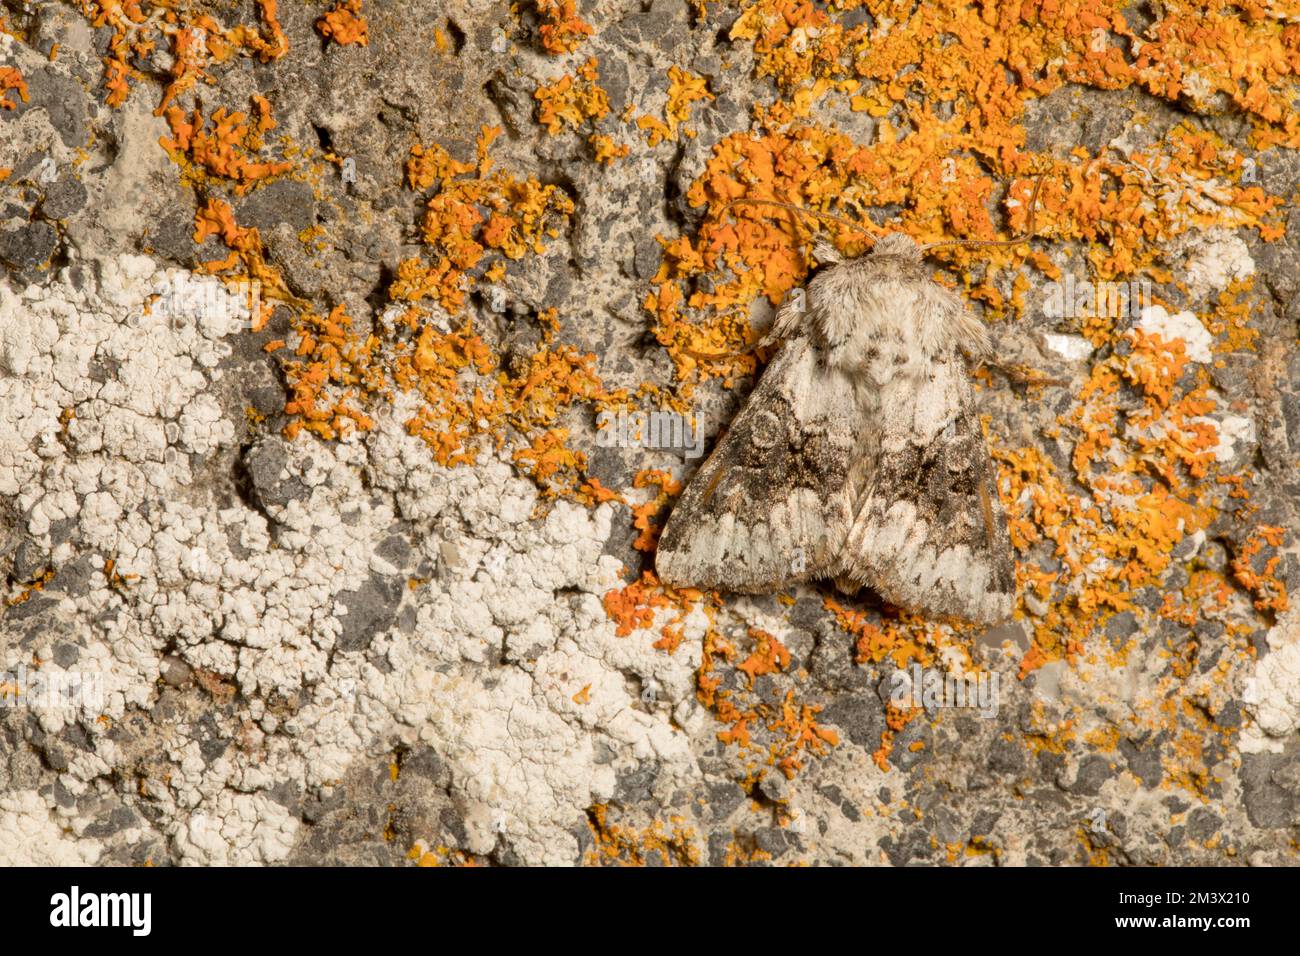 Broad-barred White moth (Hecatera bicolorata) resting on a lichen covered wall. Powys, Wales. July. Stock Photo